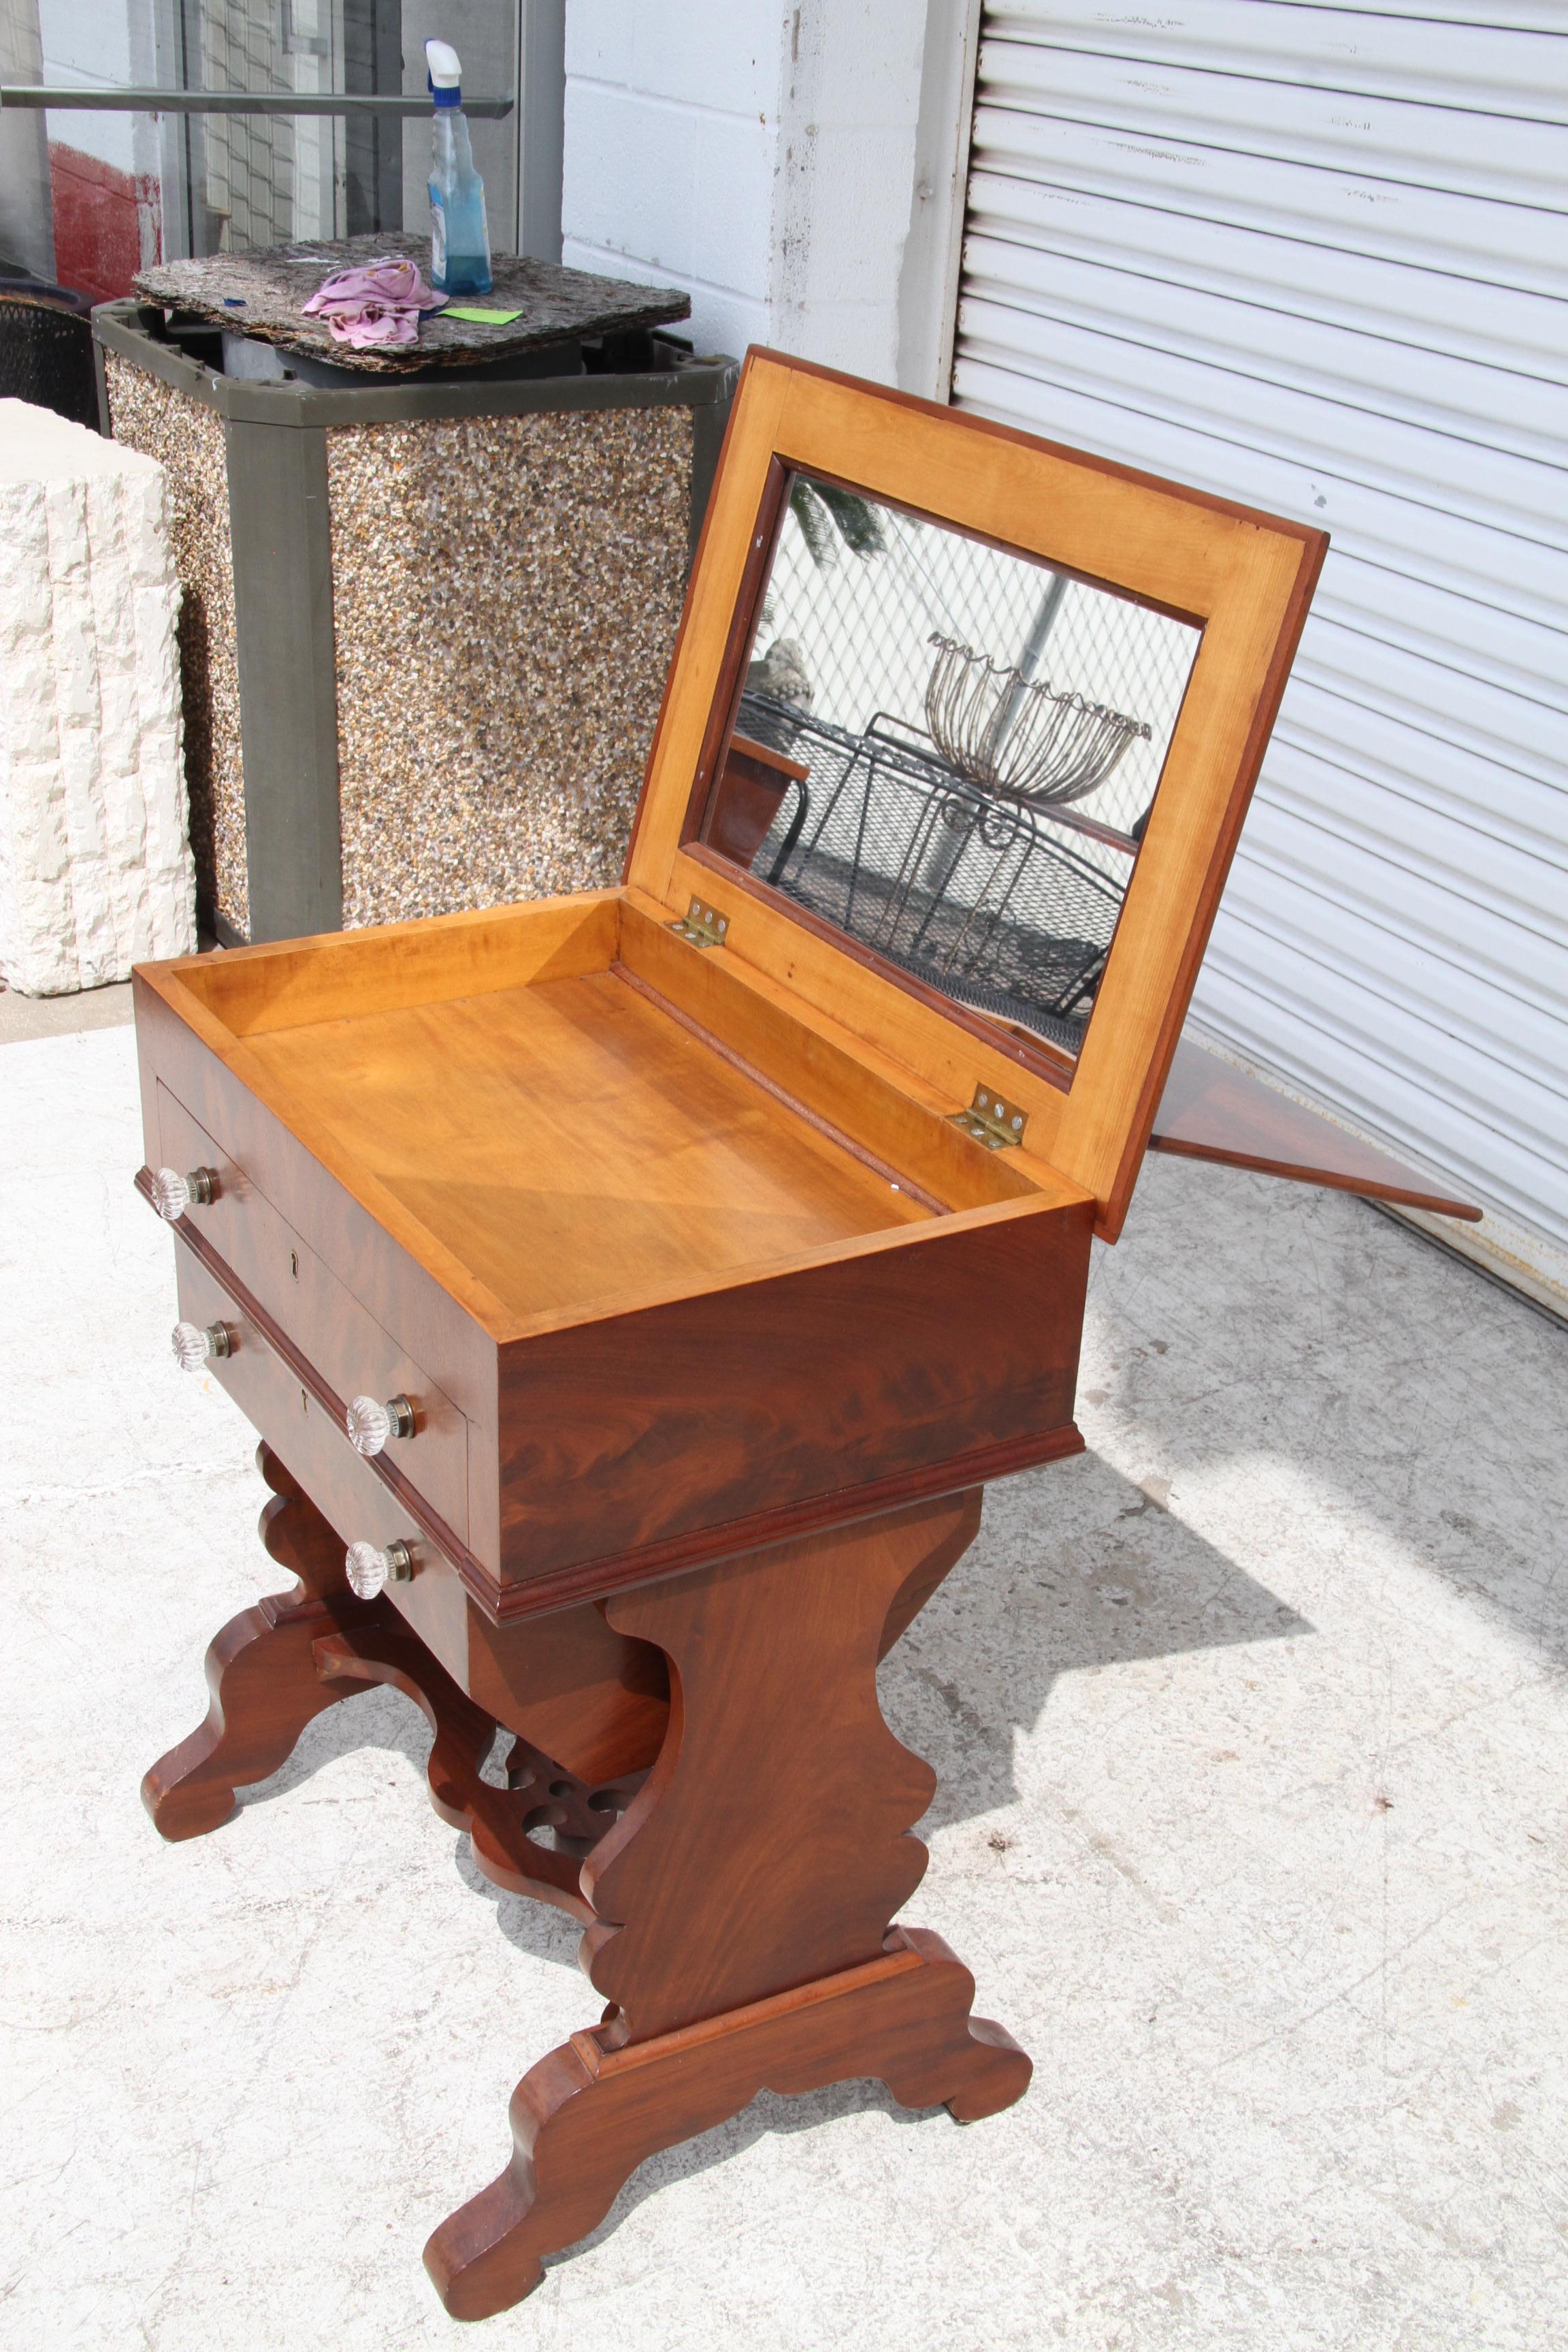 Empire Style Walnut Dressing Table

Empire style dressing table in burl walnut with 2 drawers. Venetian glass pulls. The flap reveals a large original mirror and a jewelry drawer underneath. 

H: 31.50 x W: 27.00 x D: 19.00